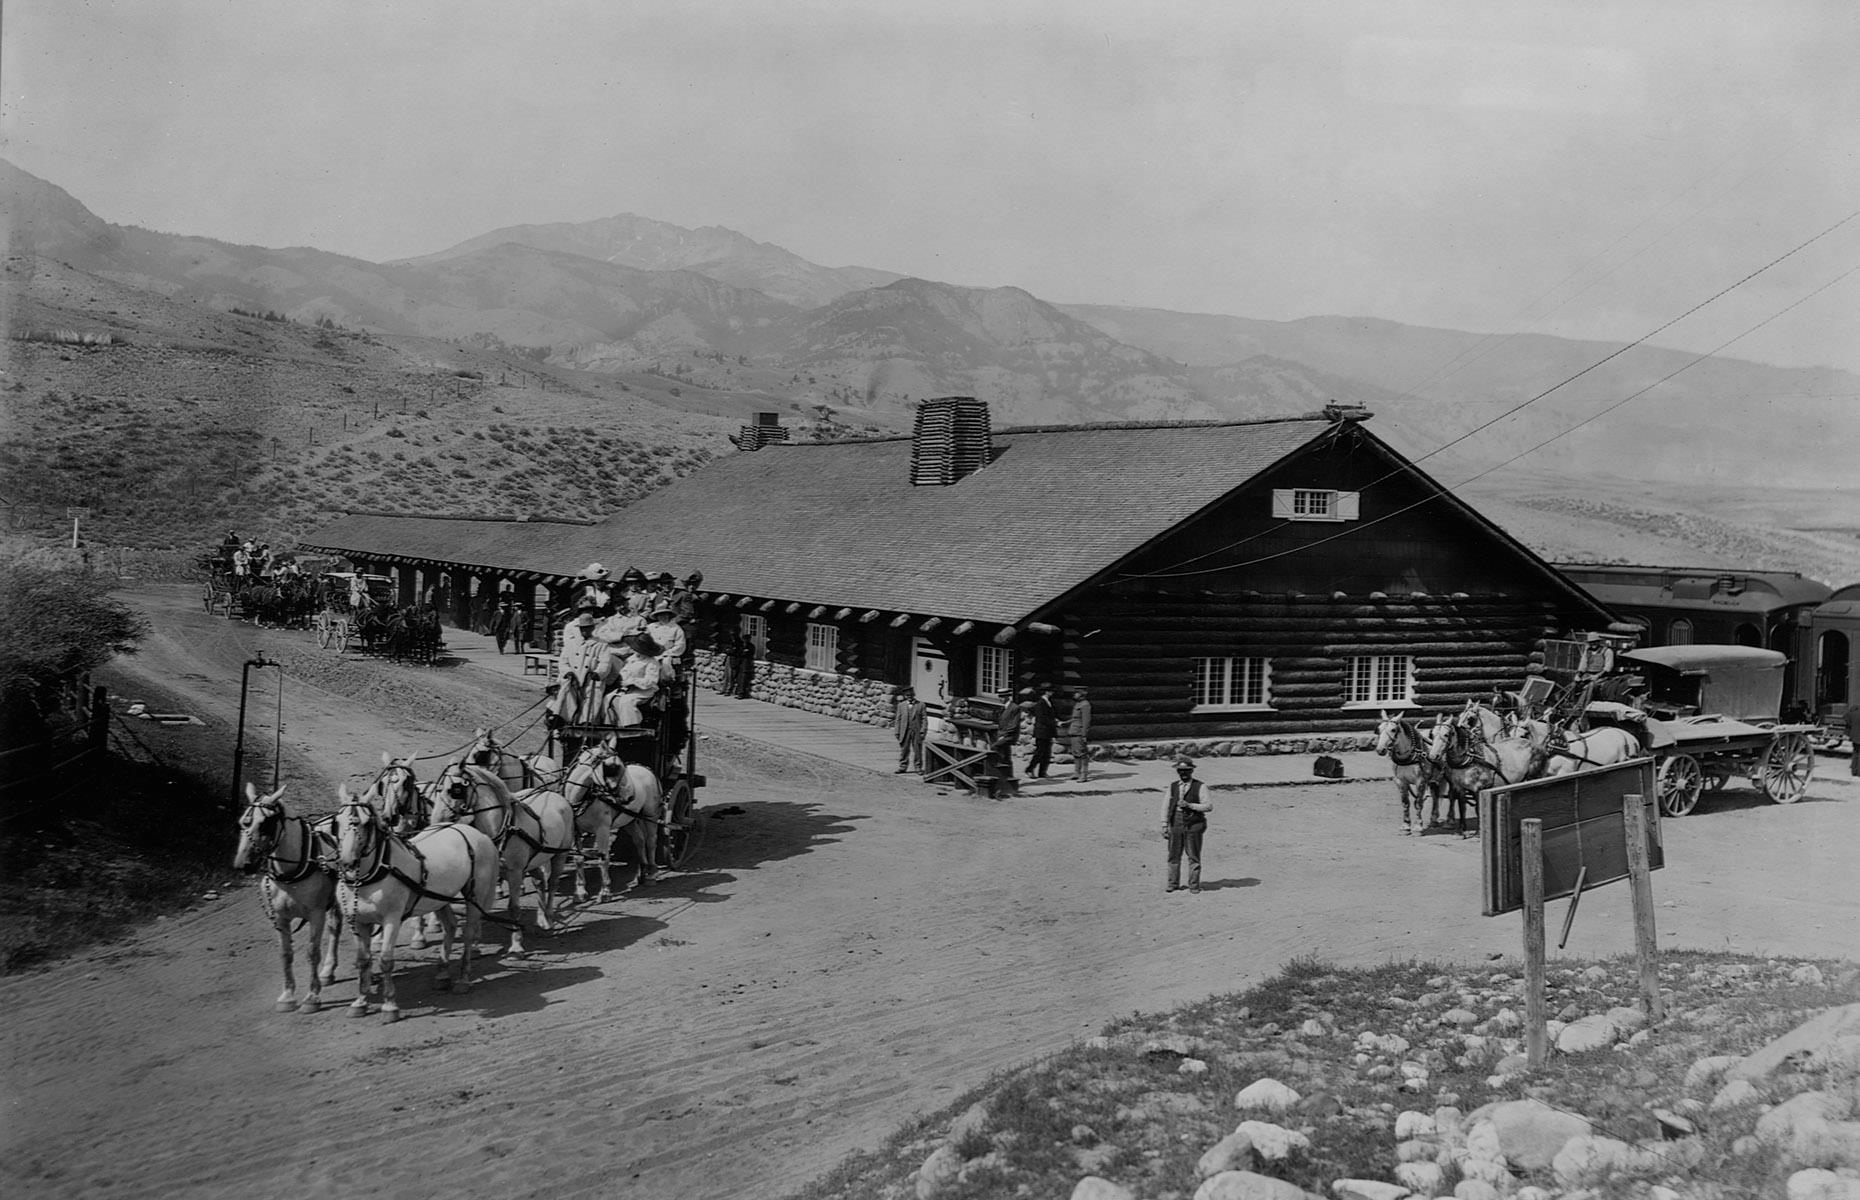 Since vehicles were prohibited in Yellowstone (and during this time, still the domain of society's wealthiest), most travelers would arrive by rail, ready to be picked up for their stagecoach tour. This is Gardner Station, which was served by the Northern Pacific Railway, and acted as a gateway to the park.